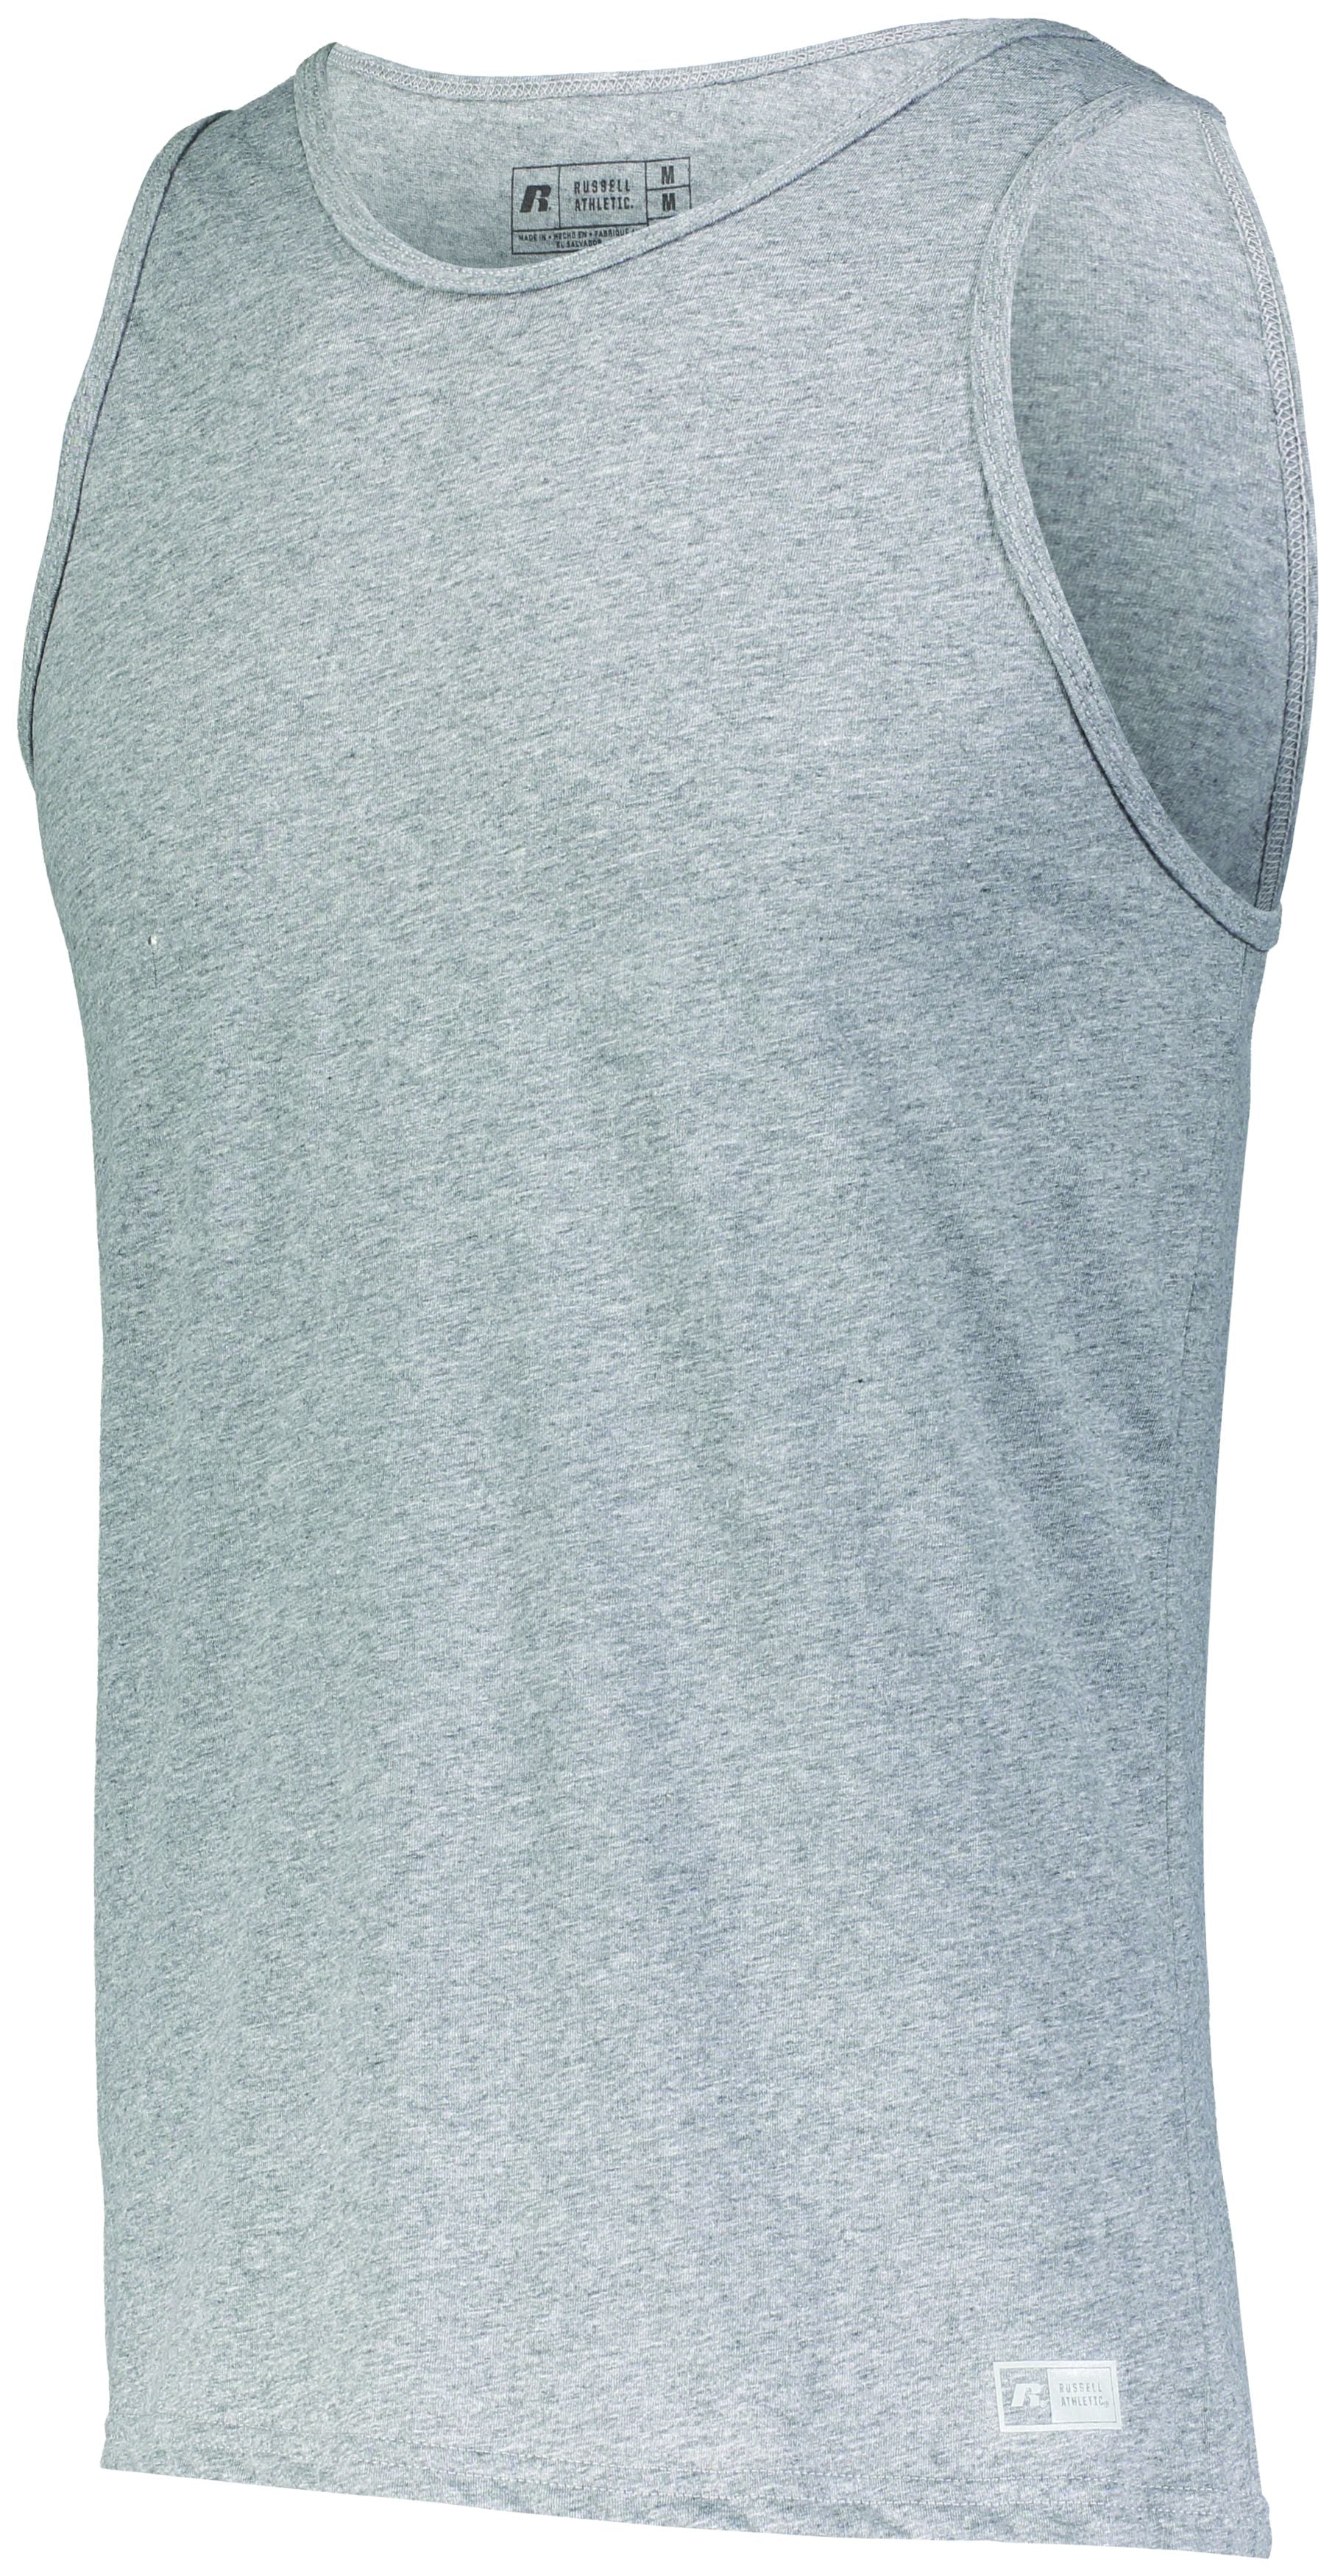 Russell Athletic Essential Tank in Oxford  -Part of the Adult, Adult-Tank, Russell-Athletic-Products, Shirts product lines at KanaleyCreations.com